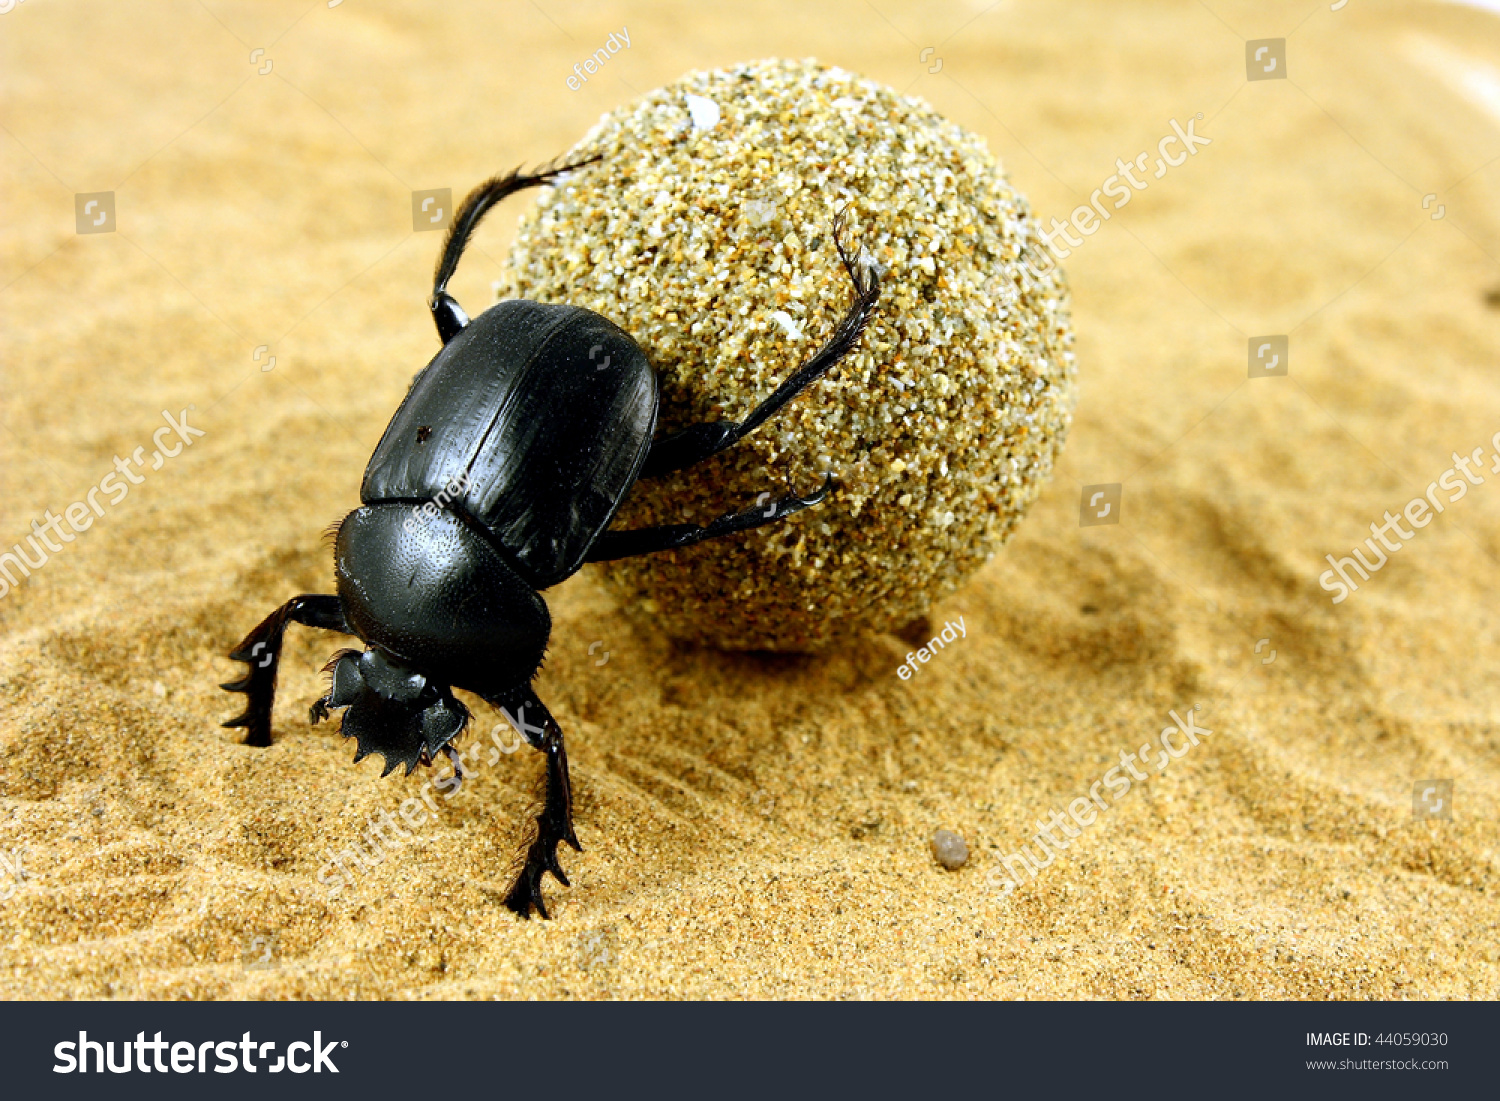 Beetle pushing its ball of dung #44059030